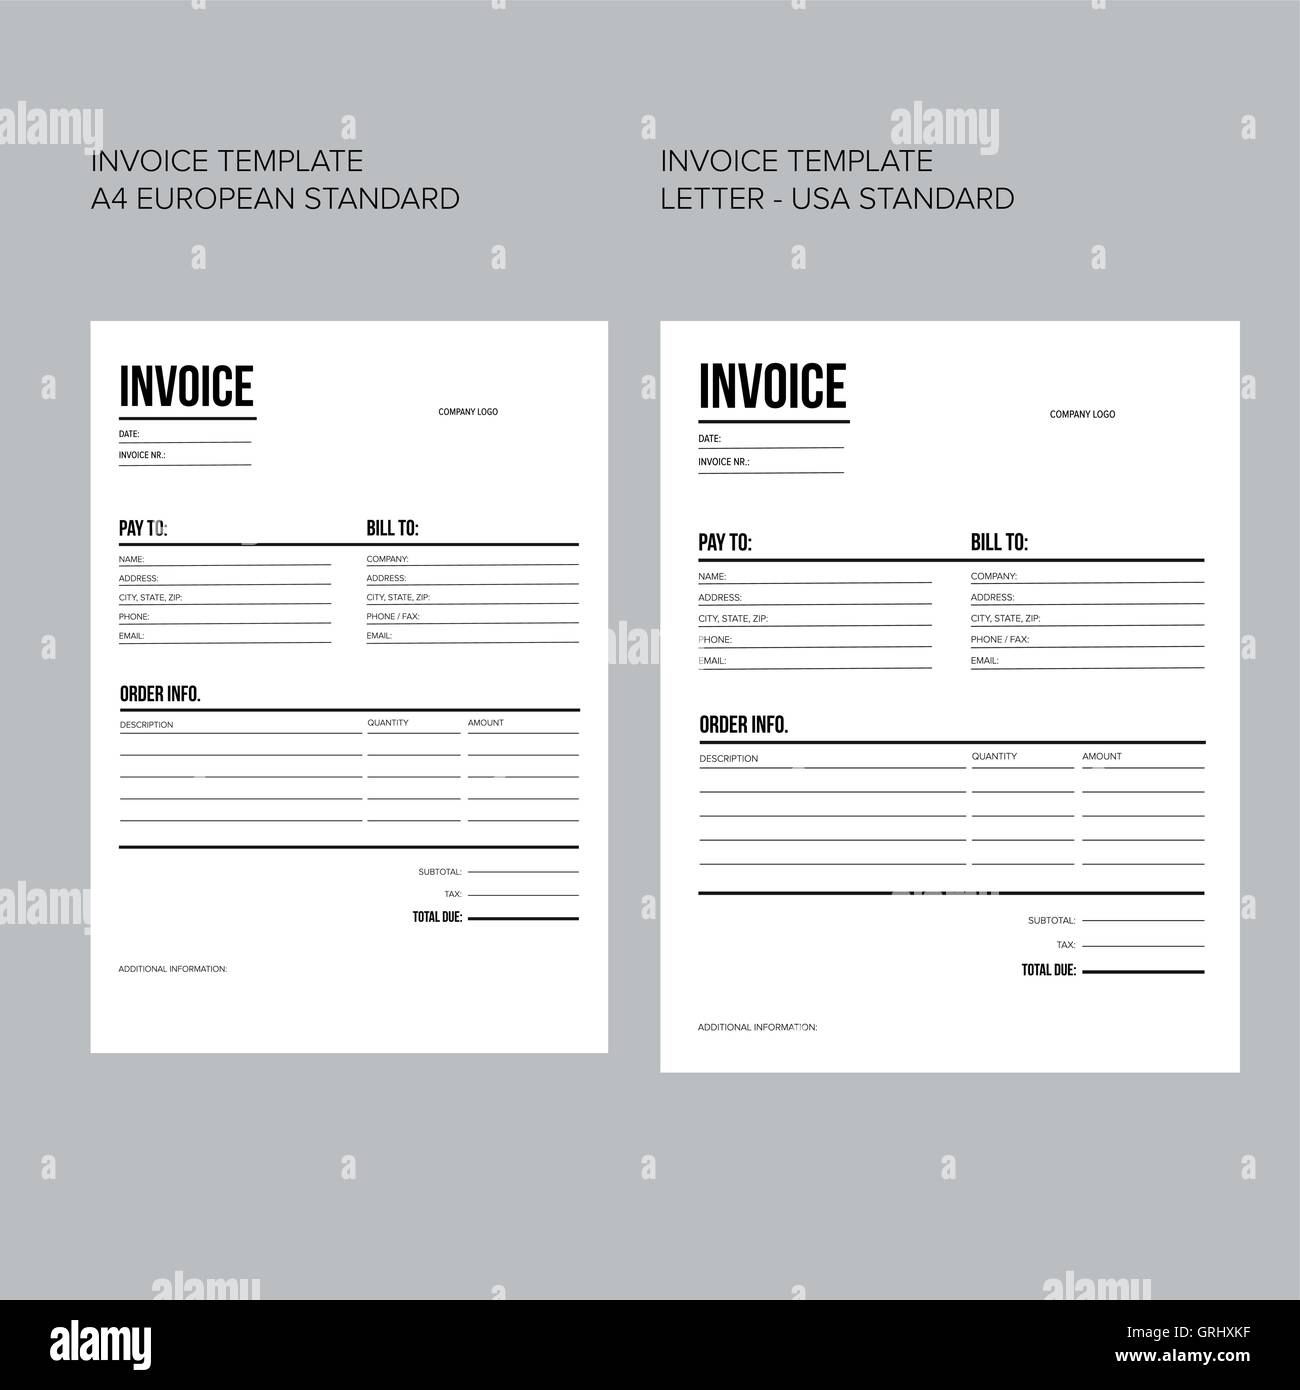 Invoice / business template - European and USA standard paper For European Invoice Template